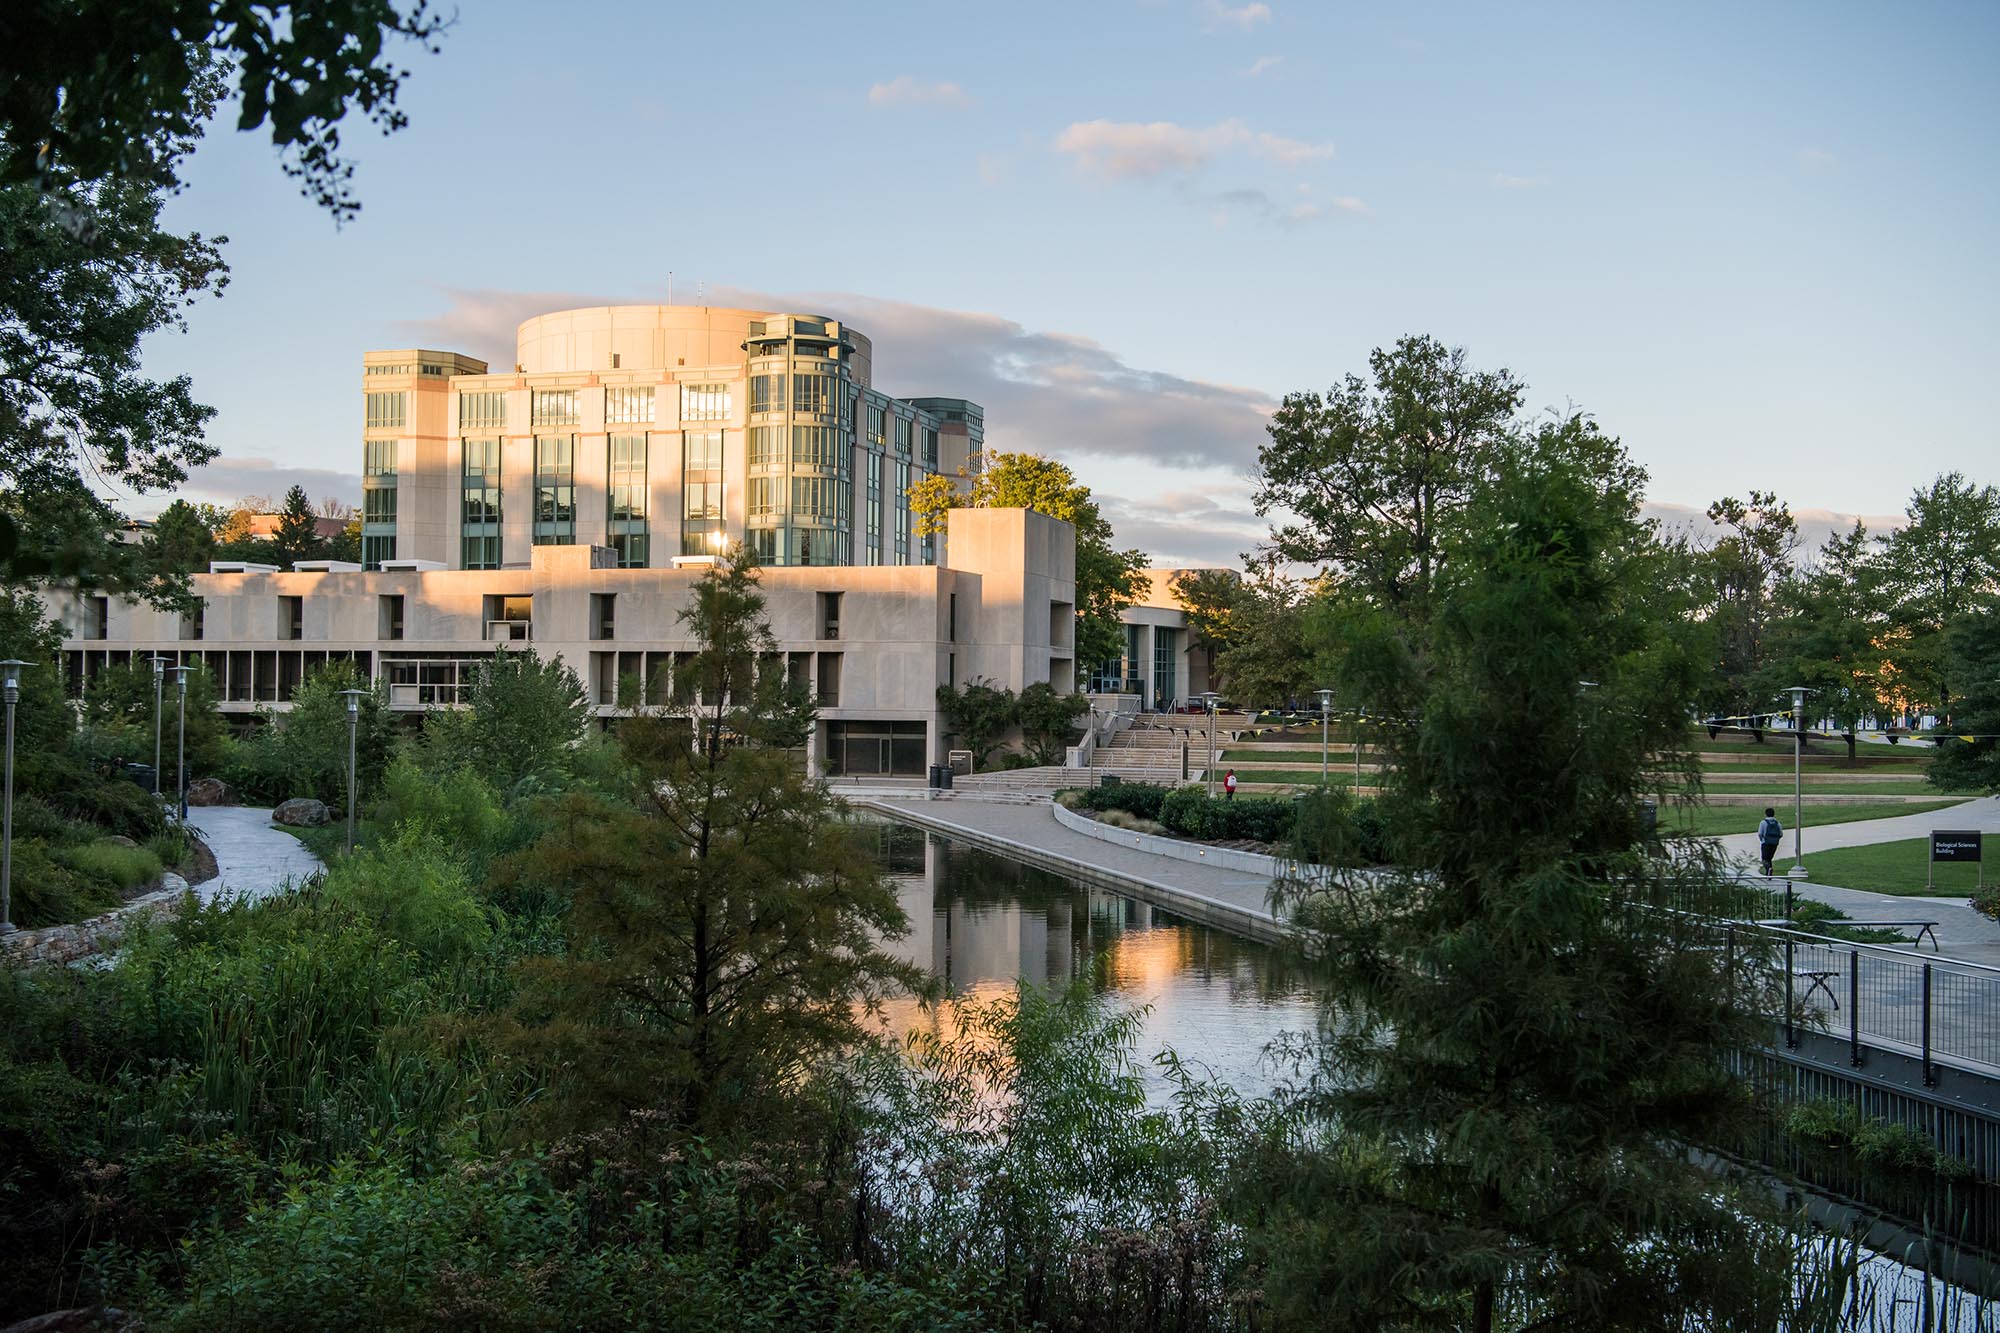 AOK Library and reflective pond